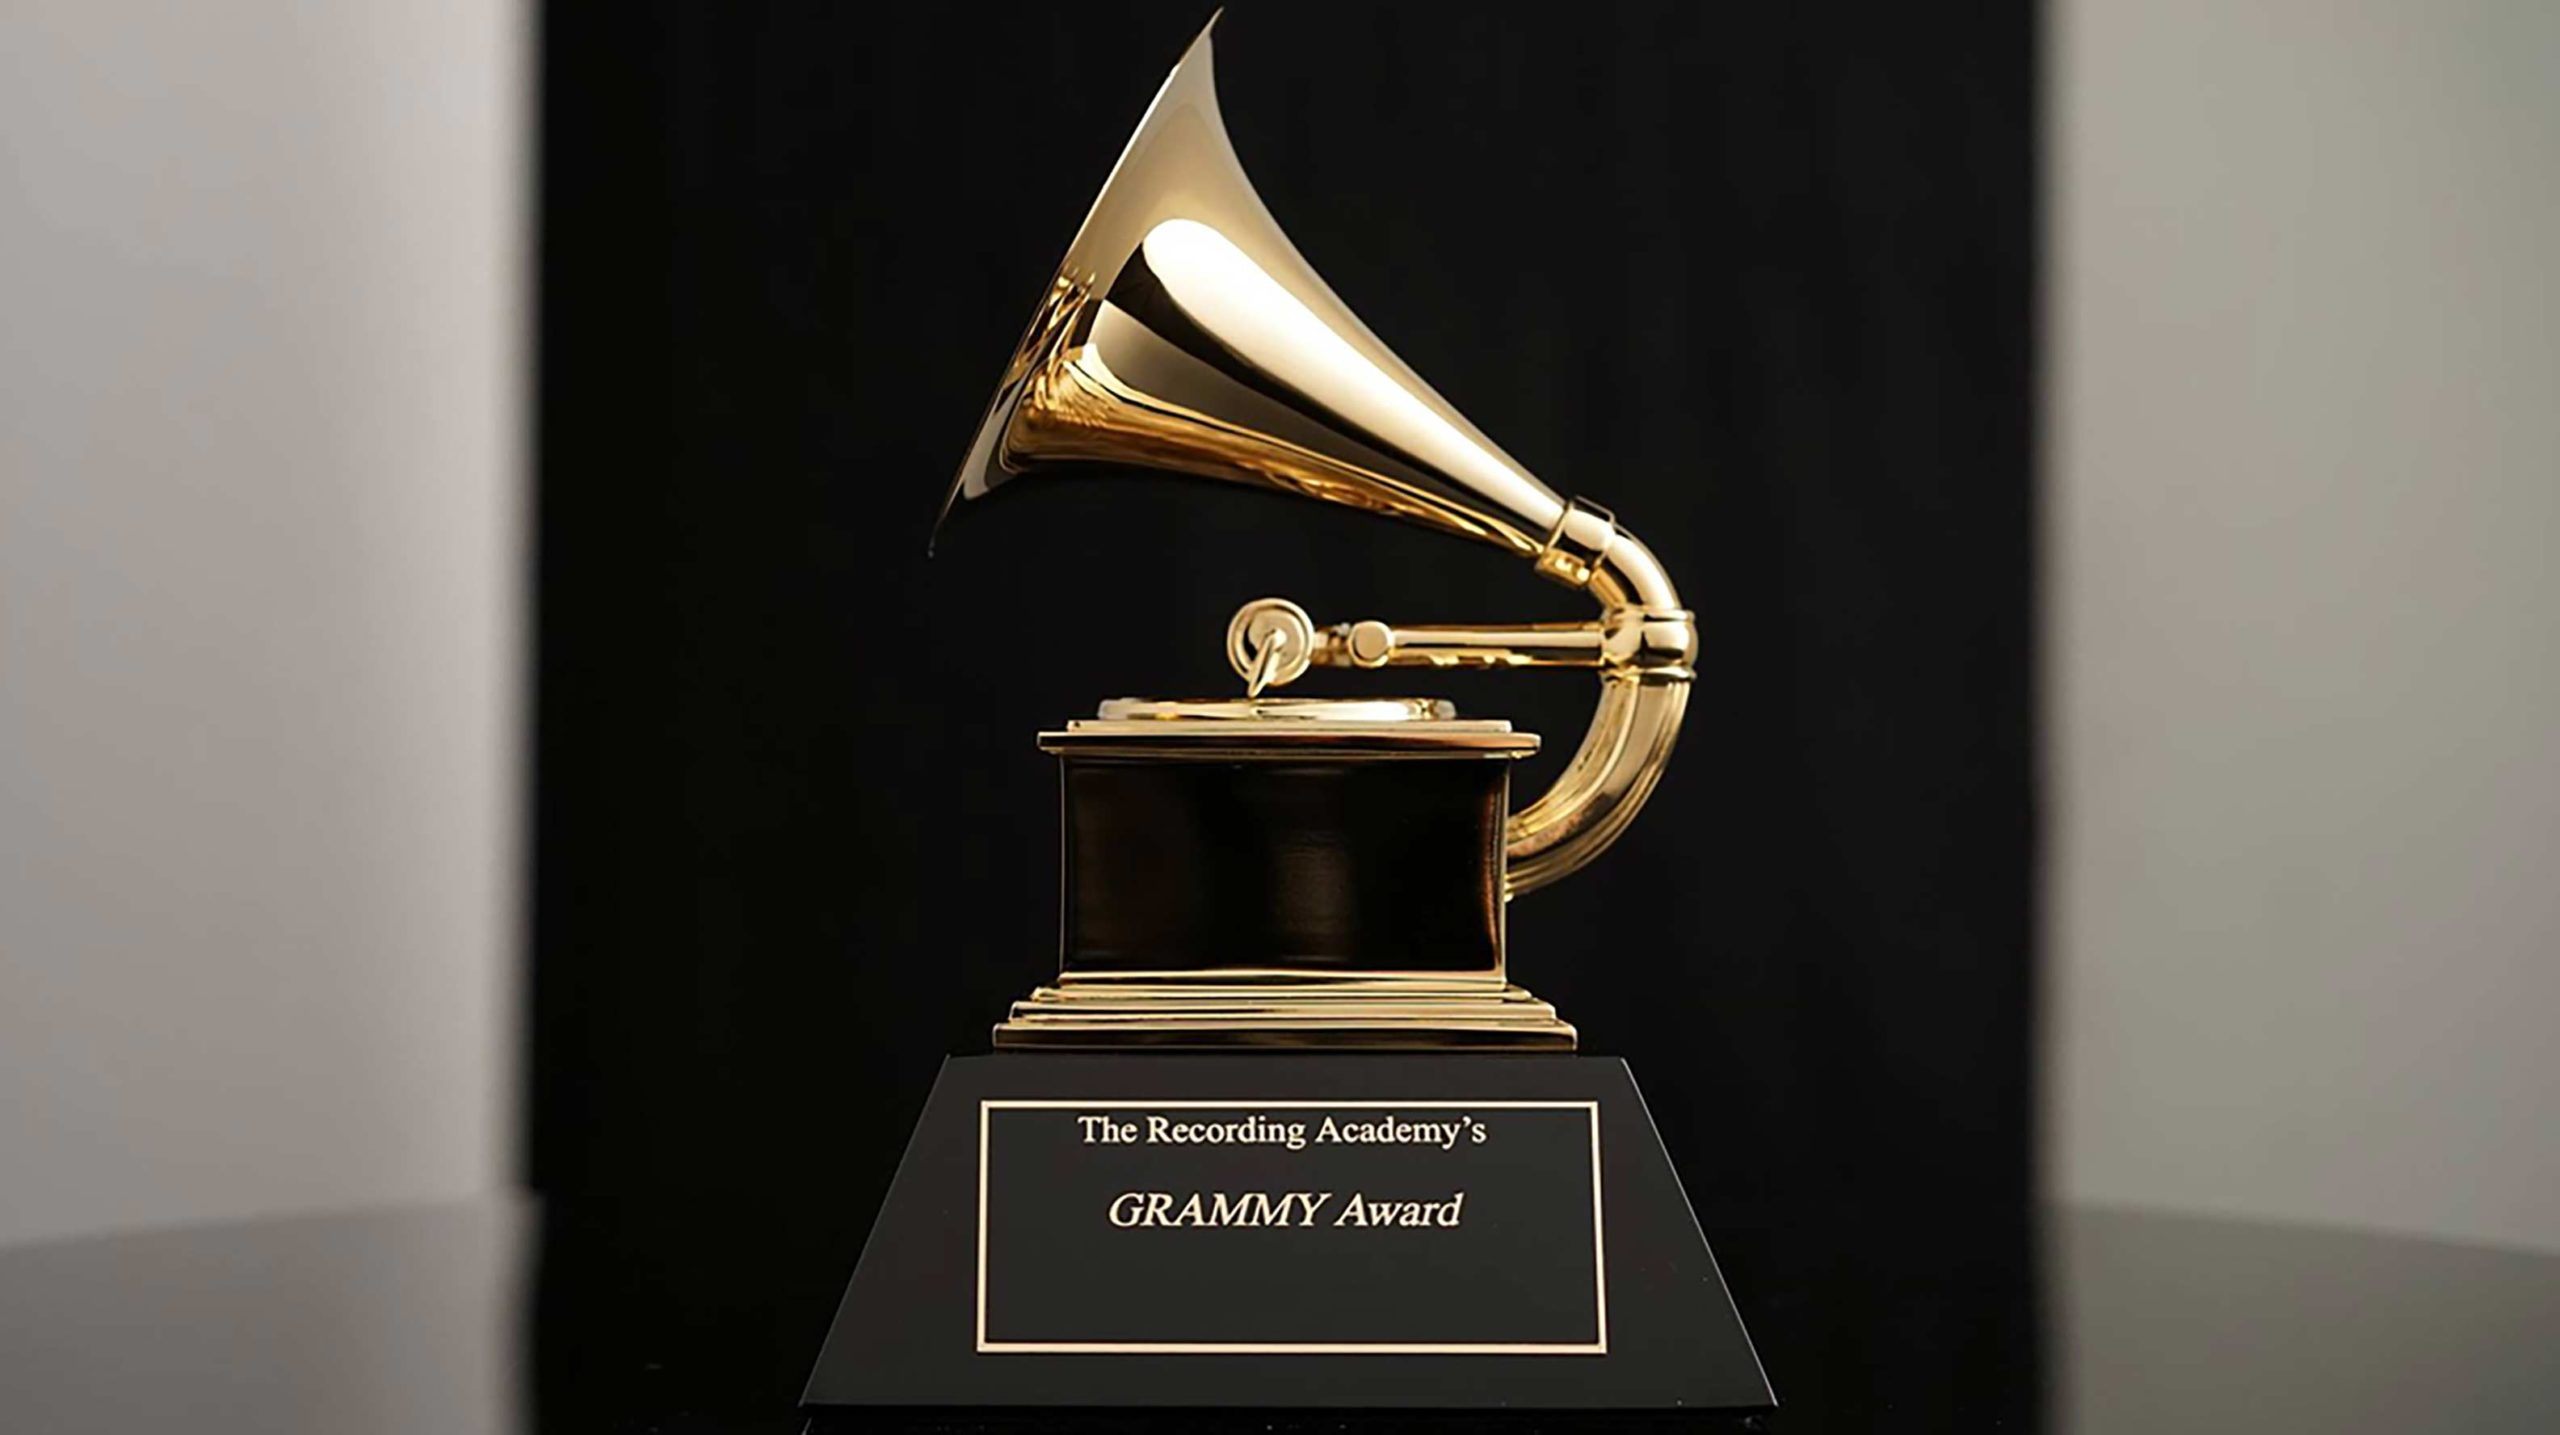 Check Full List Of Nominees For The Grammy Awards 2023